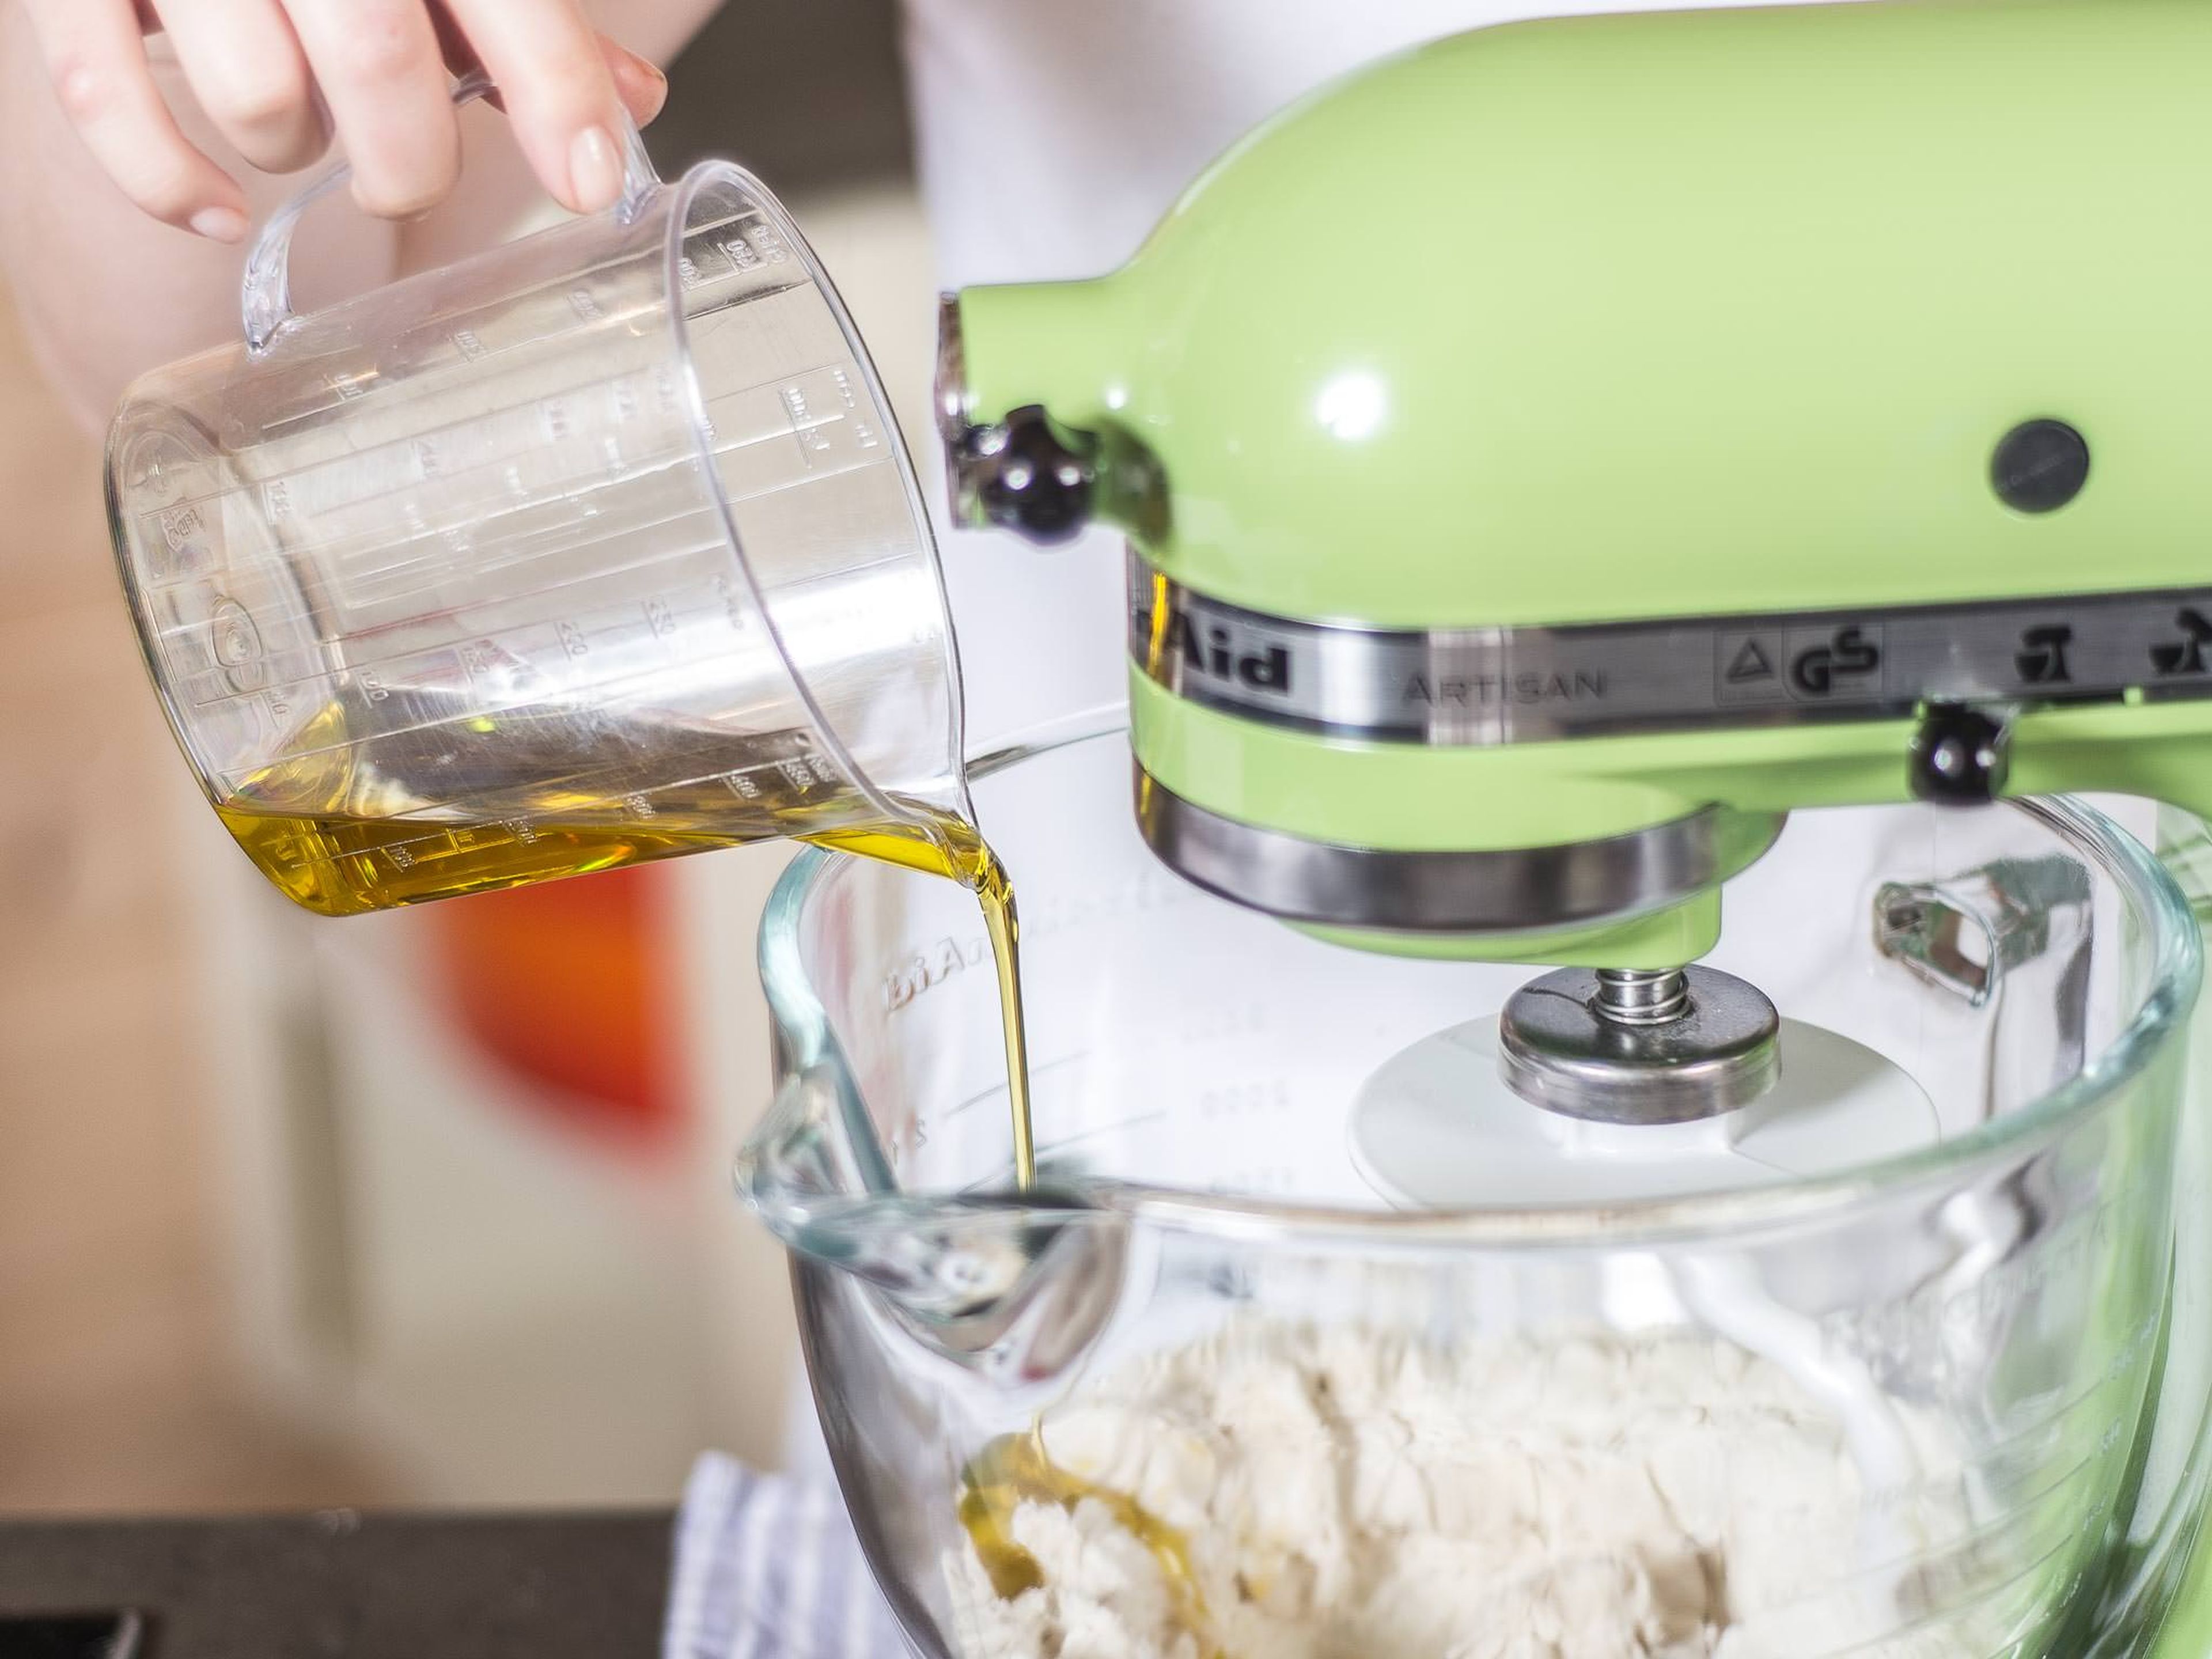 Work the flour, water, yeast, sugar, salt and olive oil into a smooth dough using a standing mixer or alternatively, by hand.